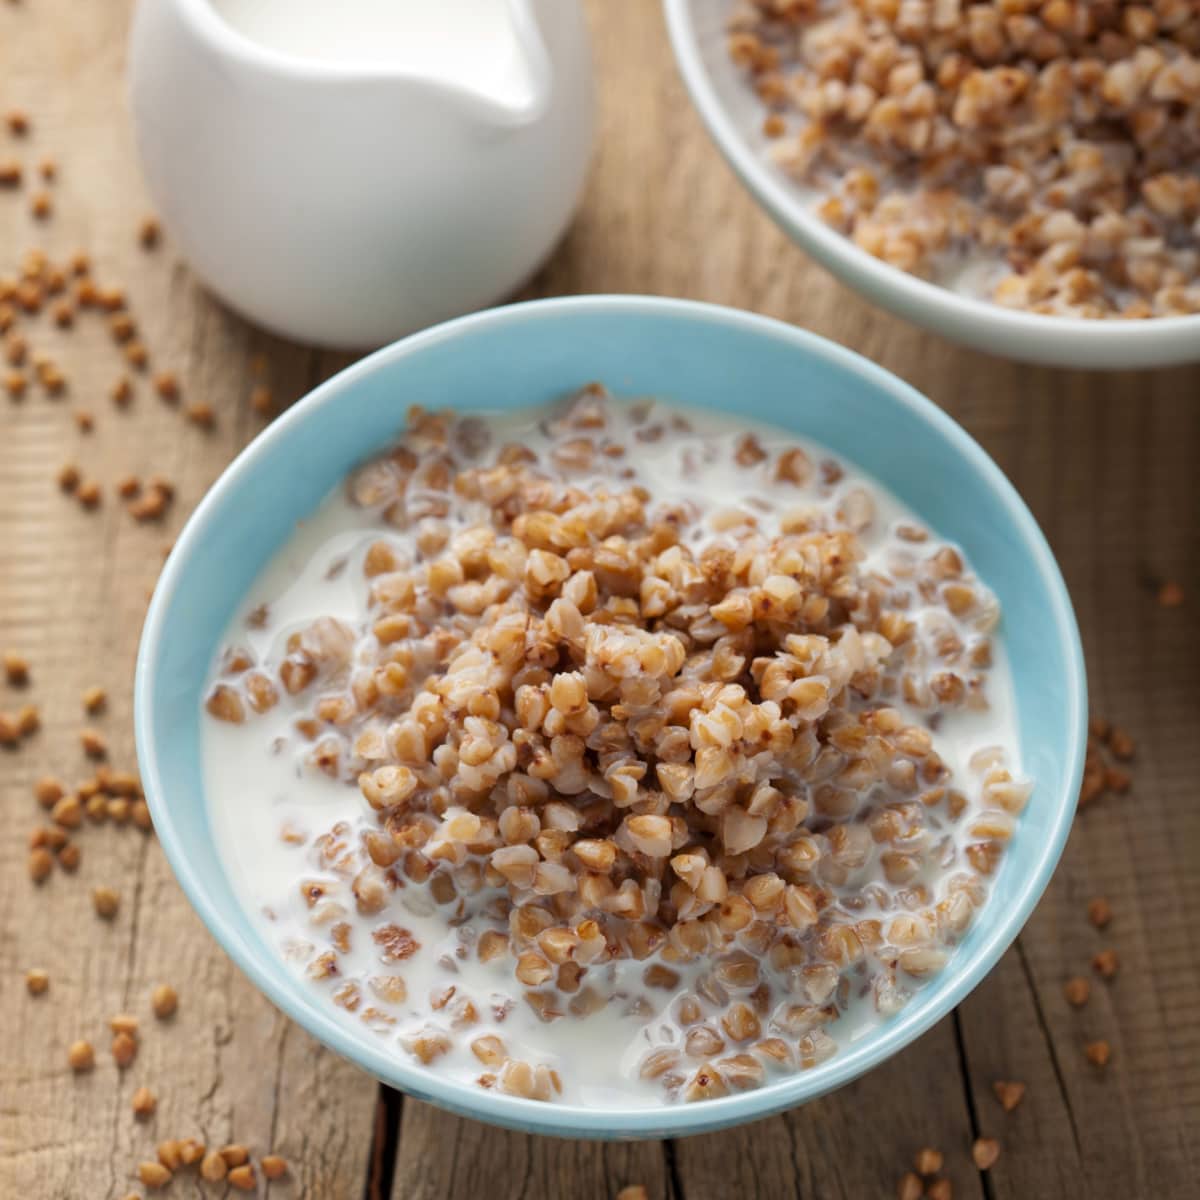 A Bowl Buckwheat Groats with Milk on a Wooden Table